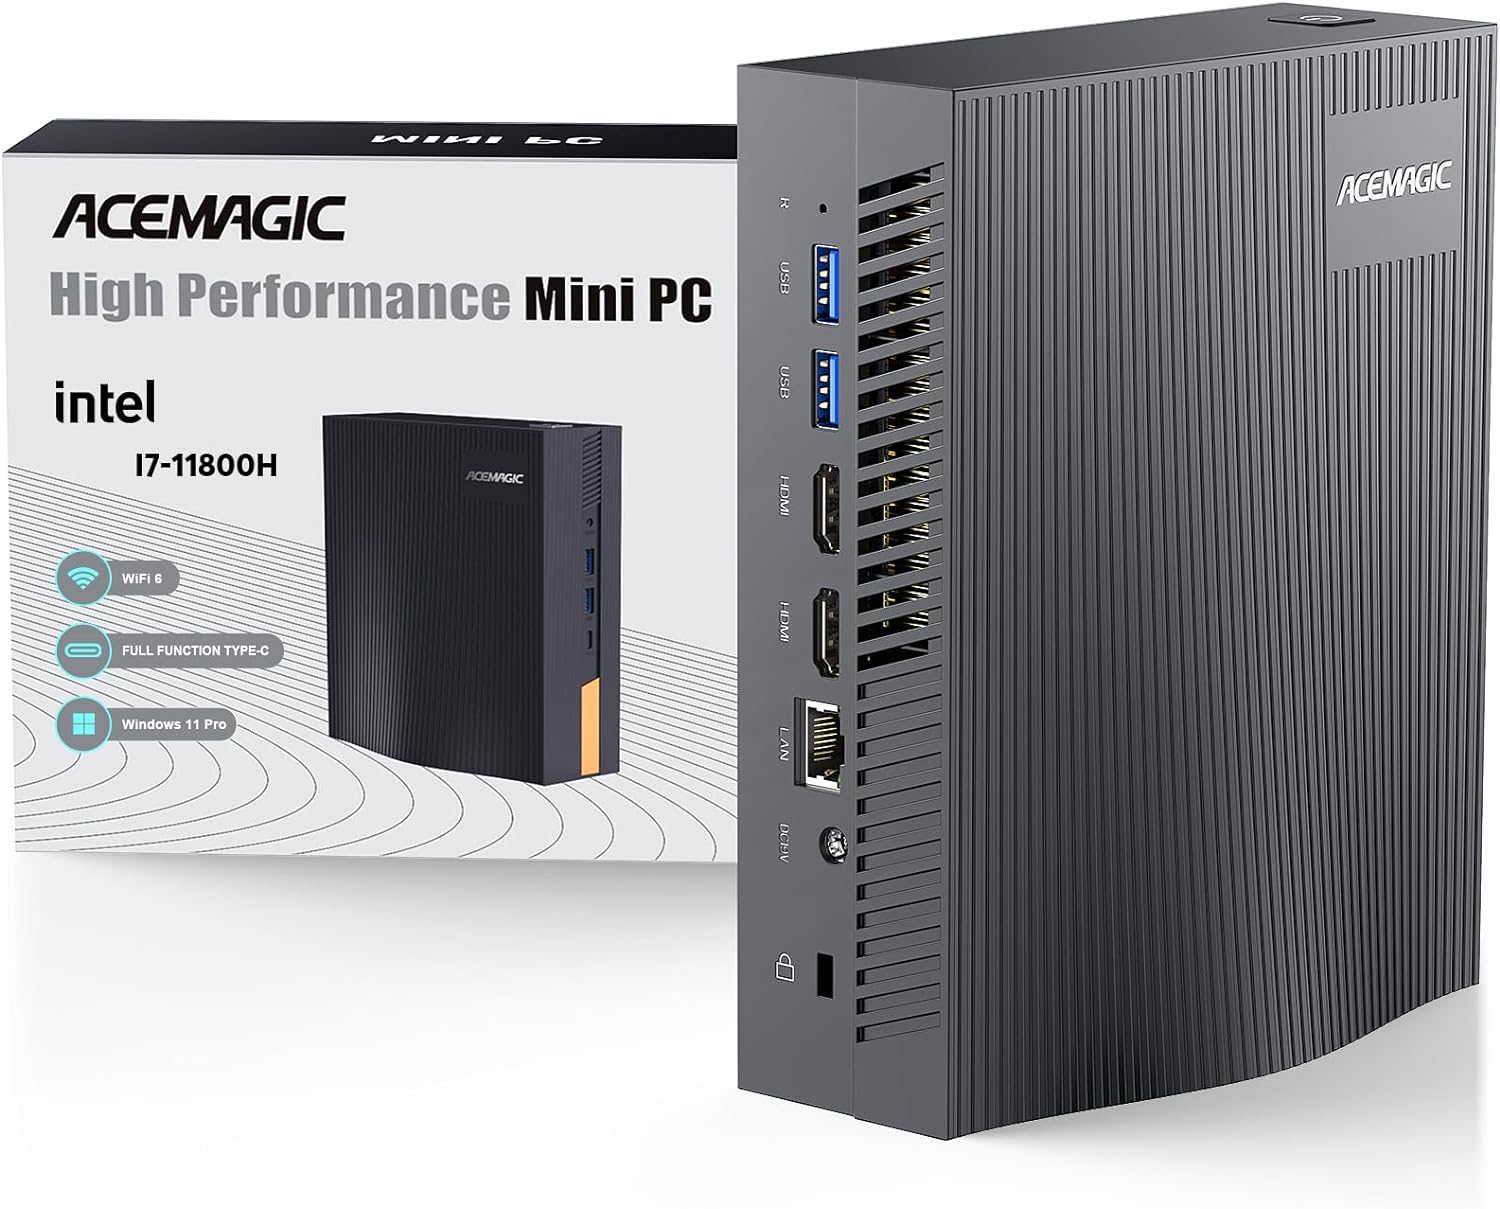 ACEMAGIC Mini PC i7-11800H(8C/16T, up to 4.6 GHz) Mini Computers, 16GB DDR4 512G NvMe SSD, Mini Desktop Computer Small PC Support 4K UHD Triple Display/WiFi 6/BT5.2 for Business/HTPC